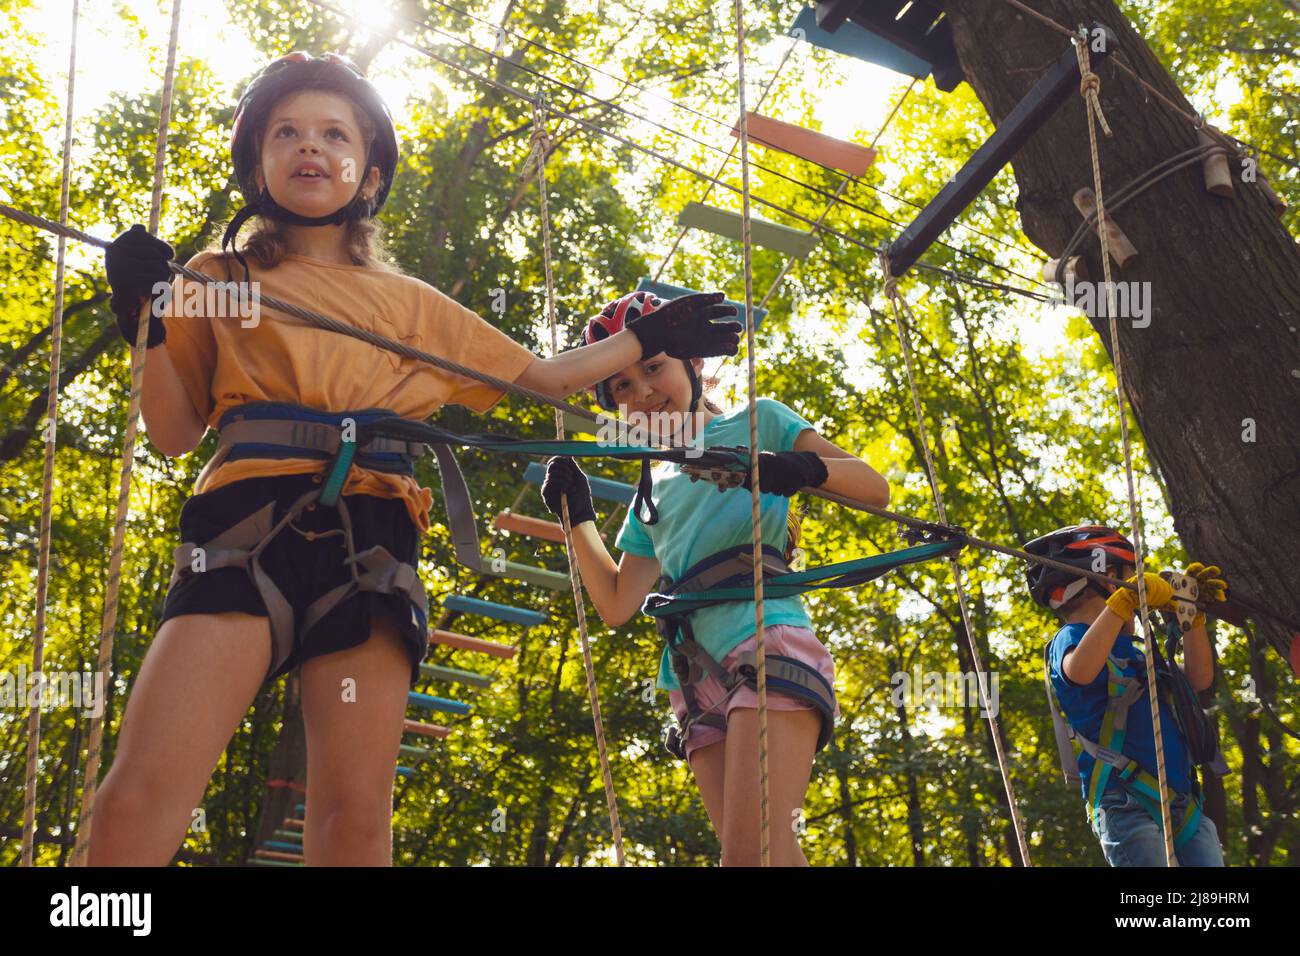 The little children in protective helmets step on the suspension bridge and hold on to the ropes Stock Photo